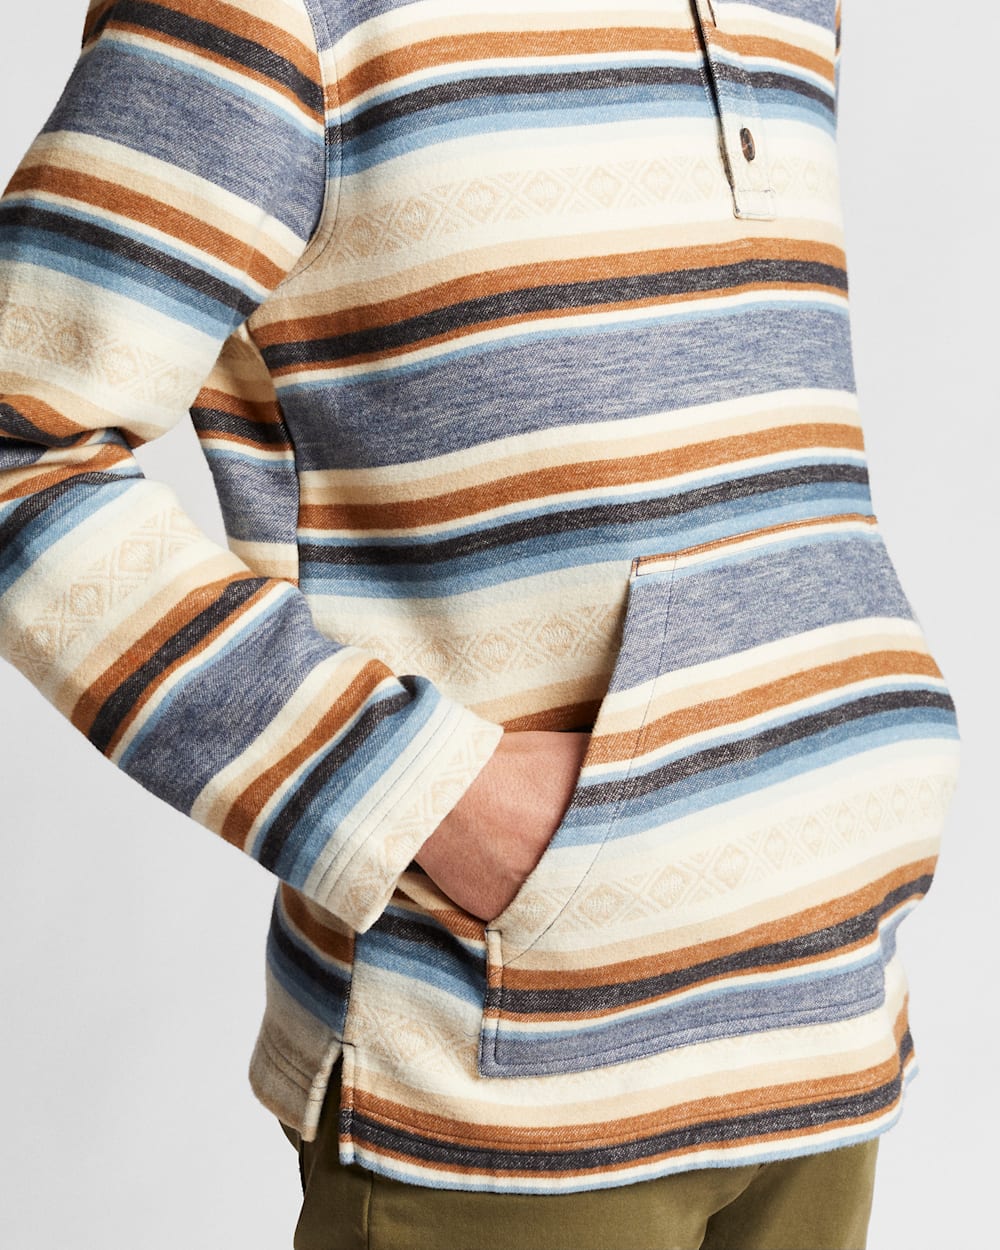 ALTERNATE VIEW OF MEN'S DOUBLESOFT HOODIE POPOVER IN BLUE SERAPE JACQUARD image number 5